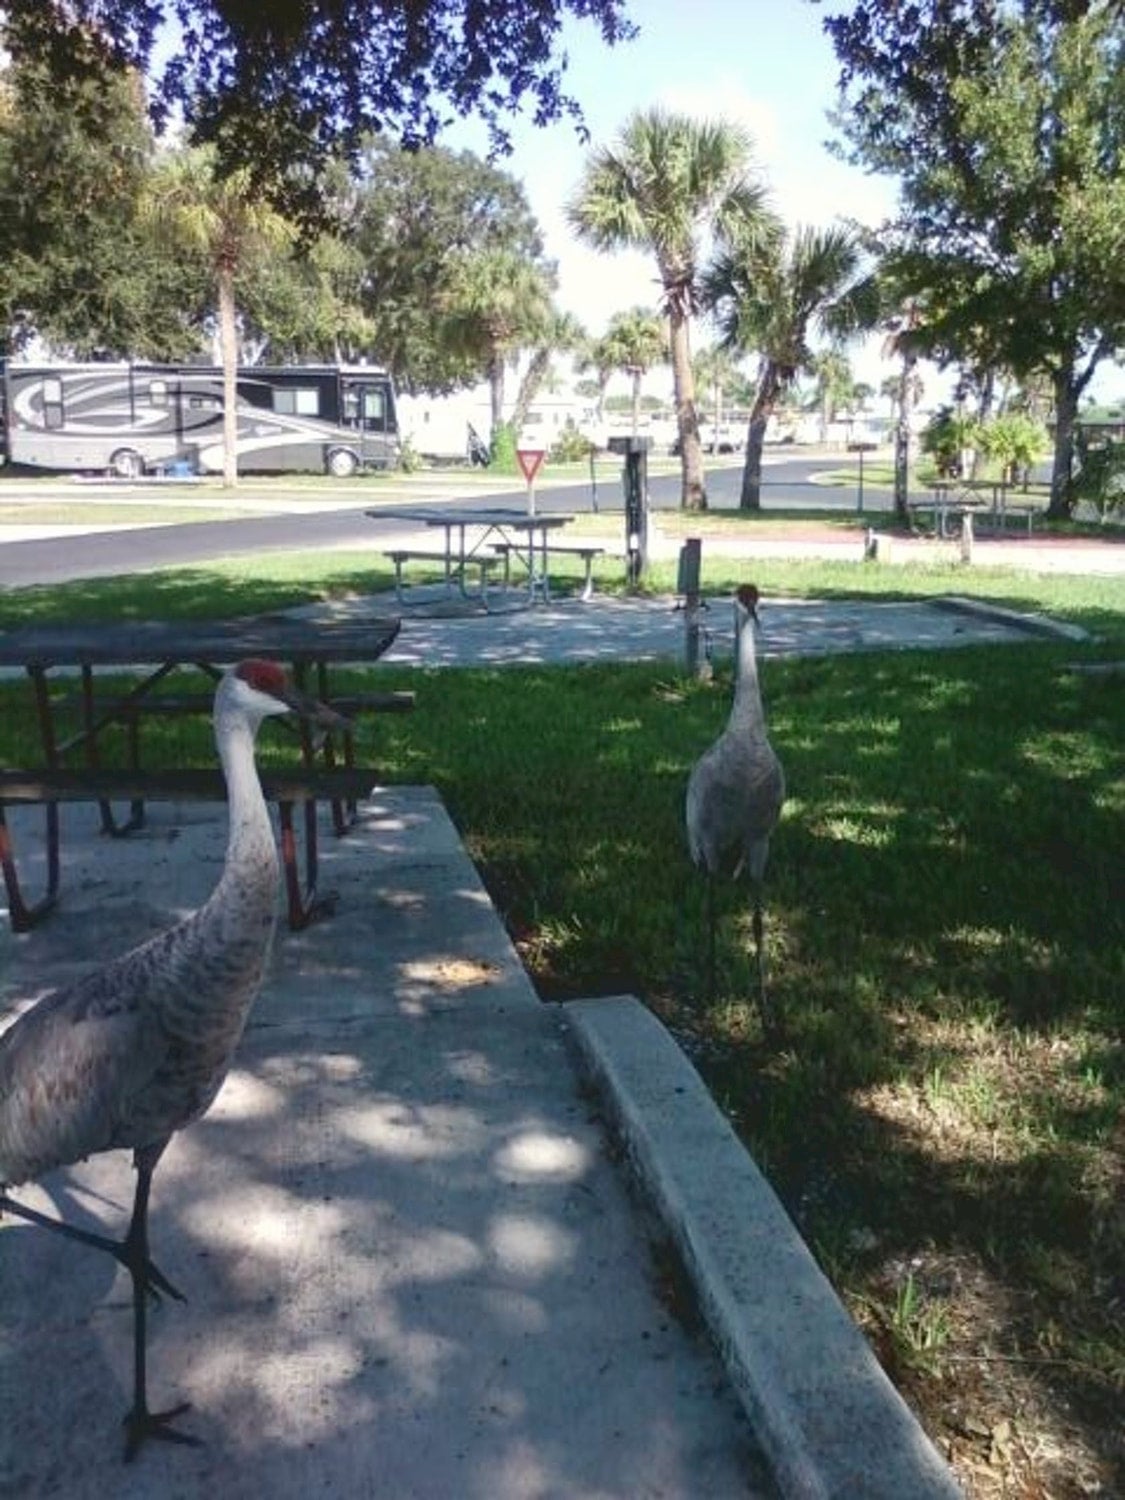 Cranes walking around campground with palm trees and RV in the background.